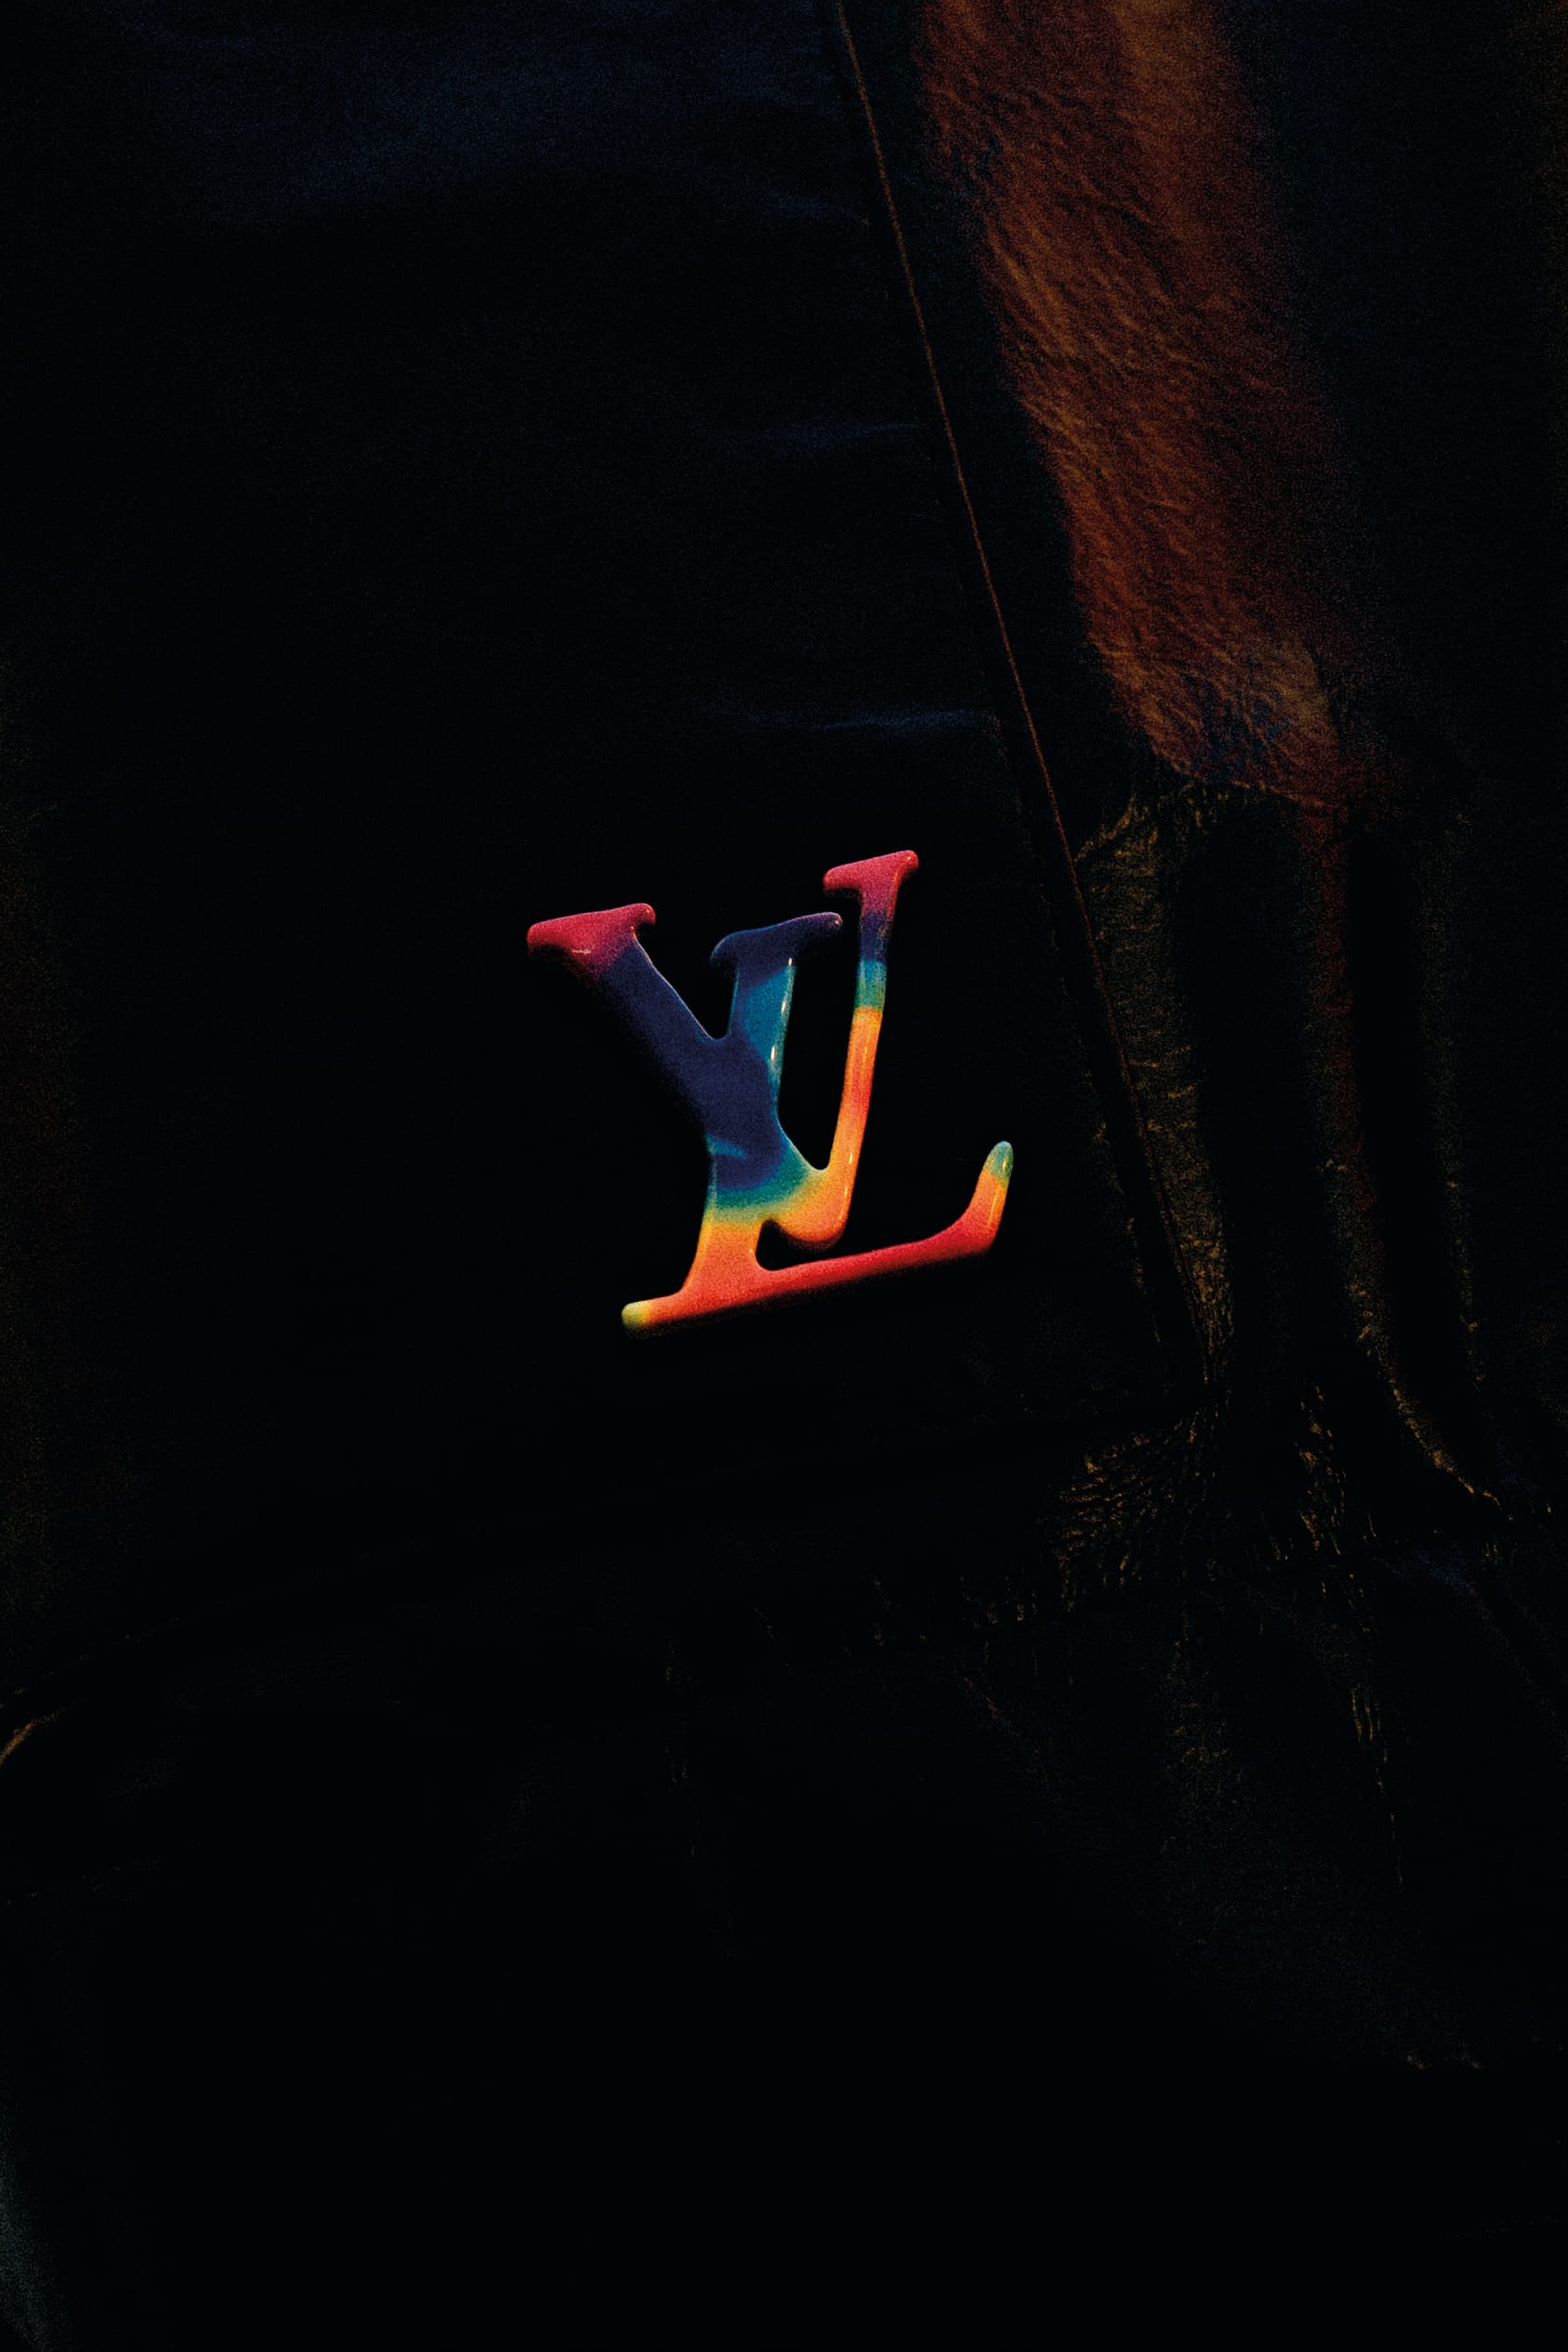 virgil abloh on X: internally referred to as [ LV 2054 ] from